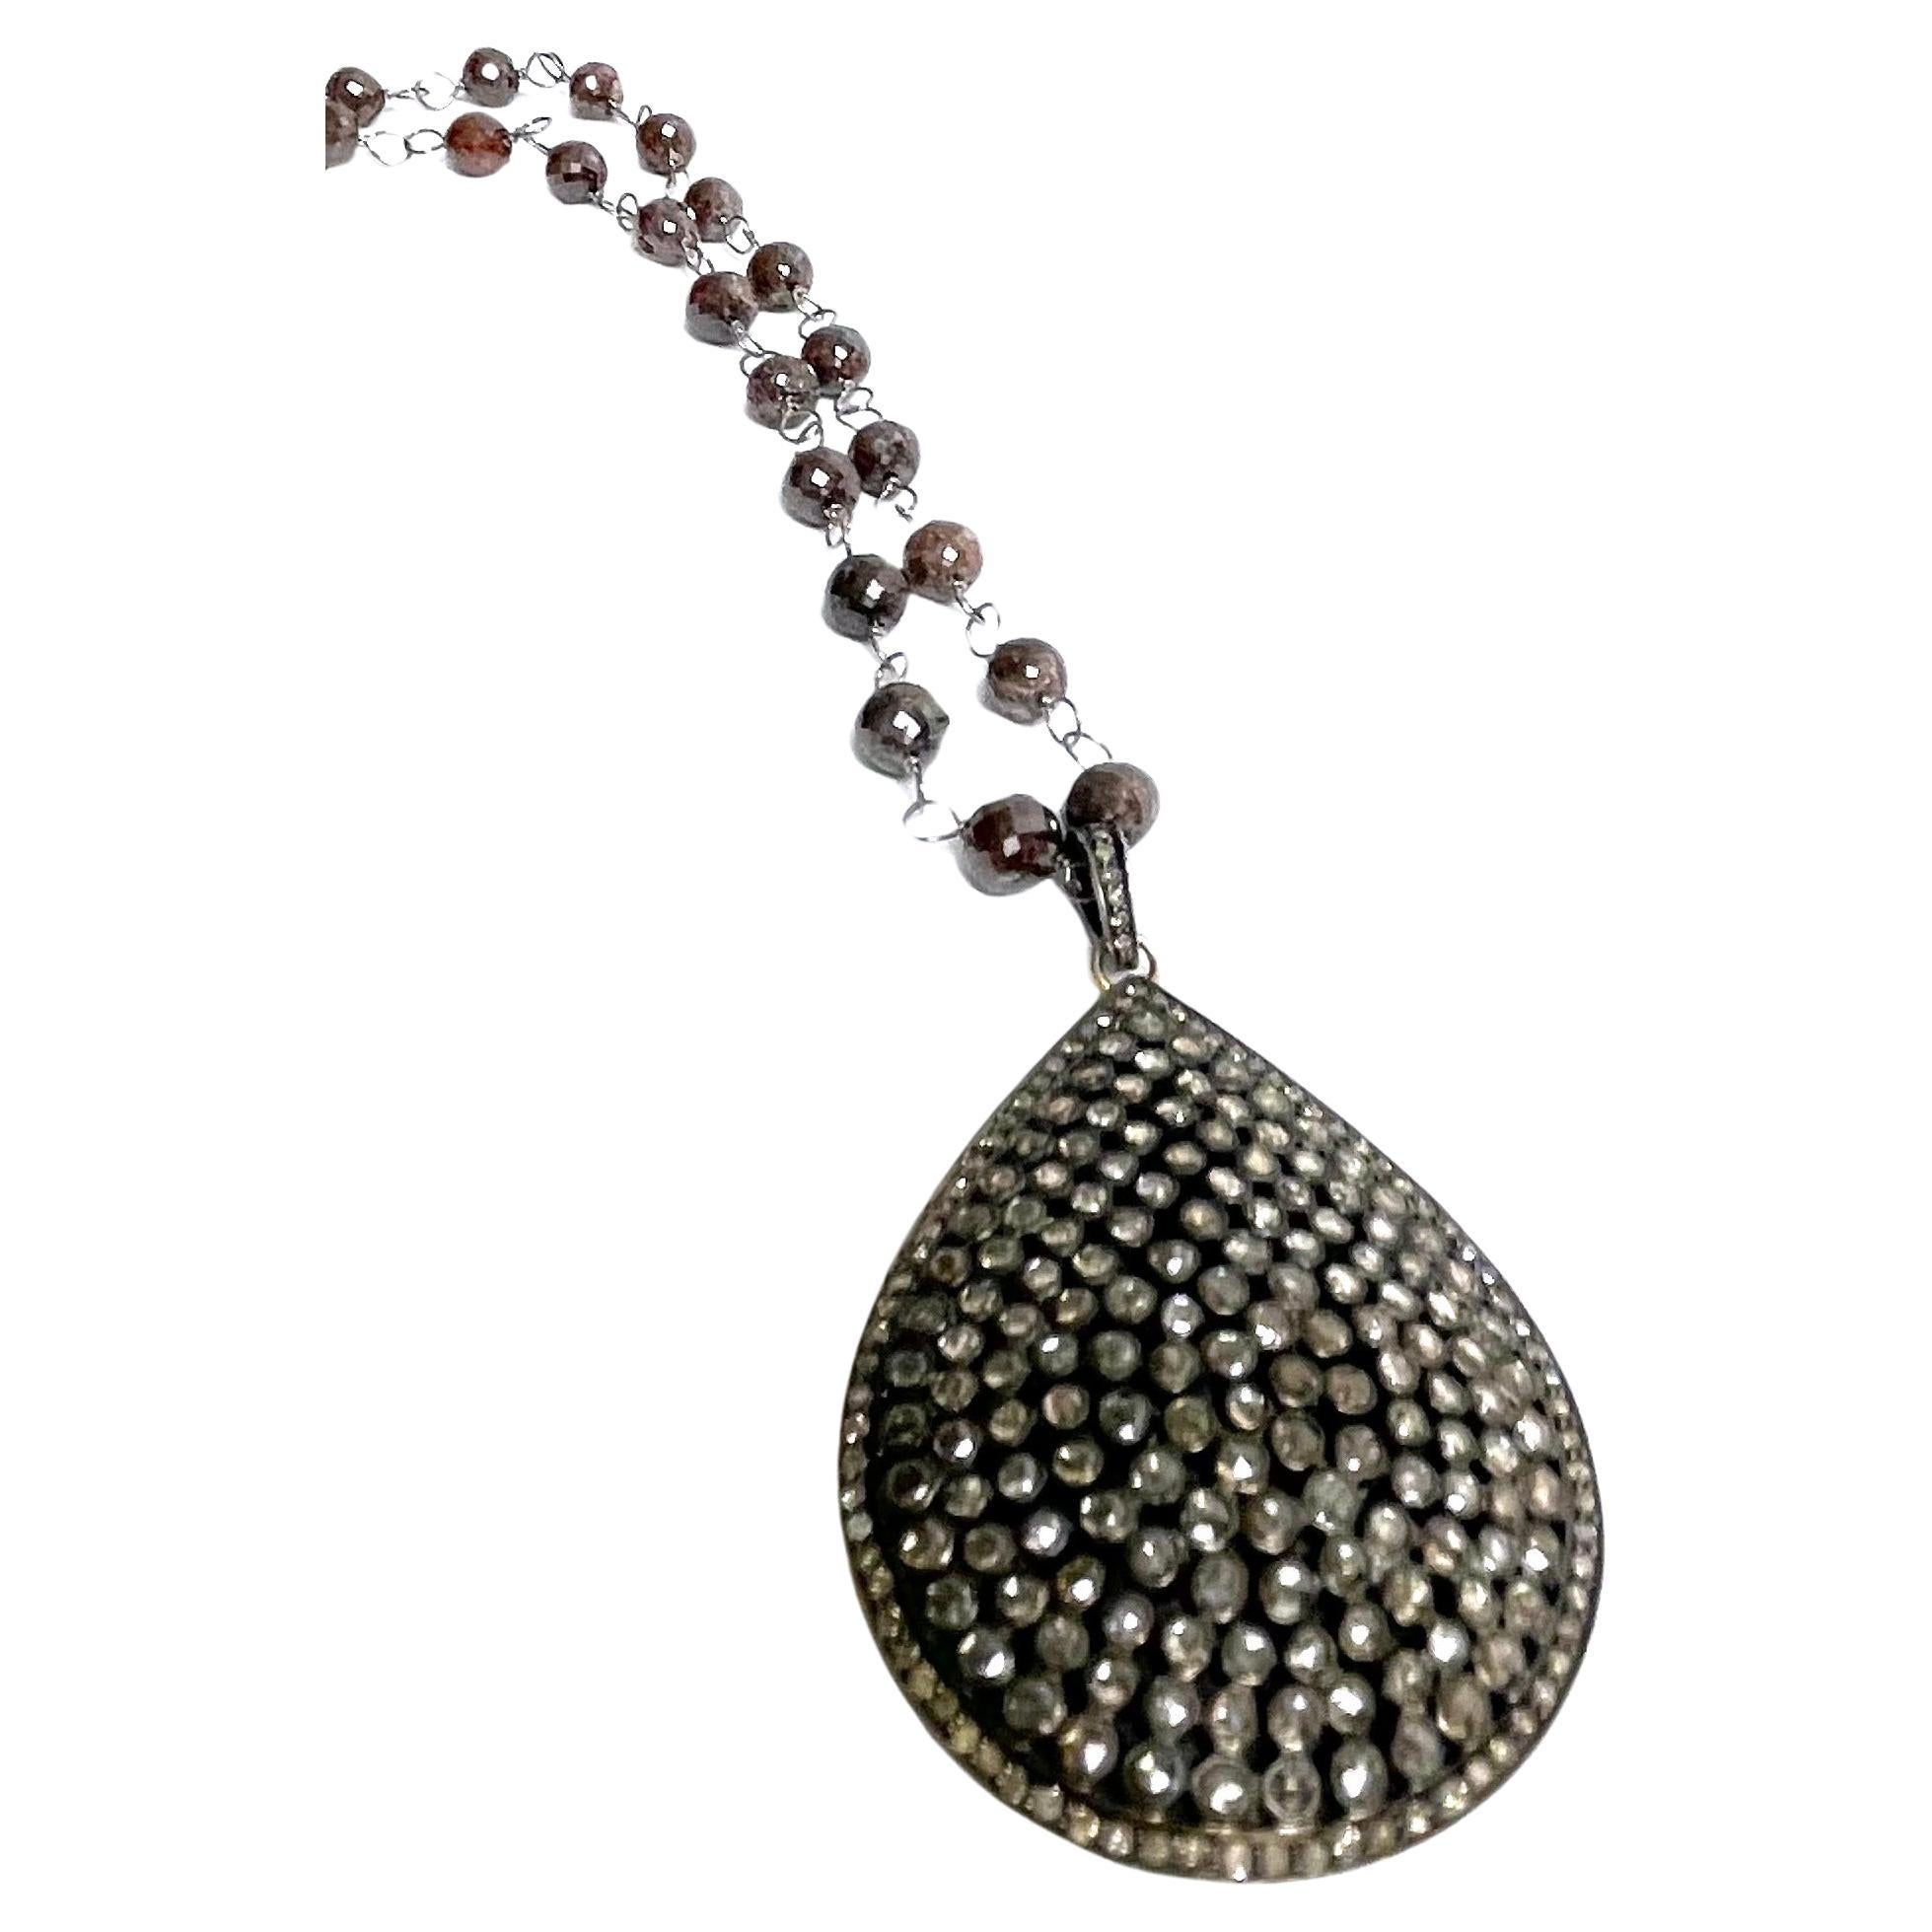 70 Carats Brown Diamonds with 7 Carats Champagne Diamonds Pendant Necklace For Sale 1